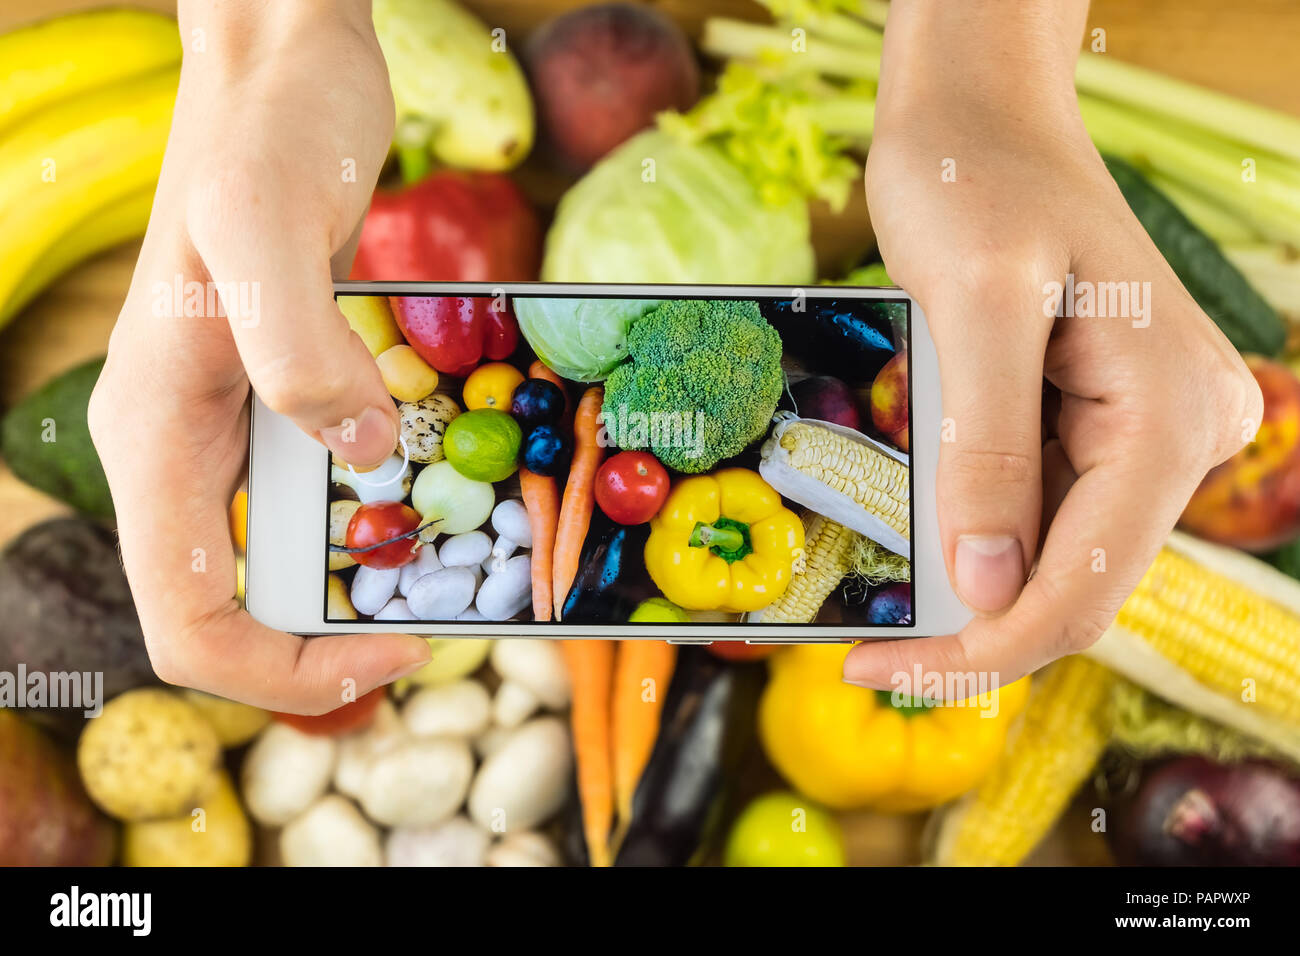 Taking photo of fresh organic fruit and vegetables on rustic wood table, top view. Close-up of female hands photographing flat lay of locally grown na Stock Photo